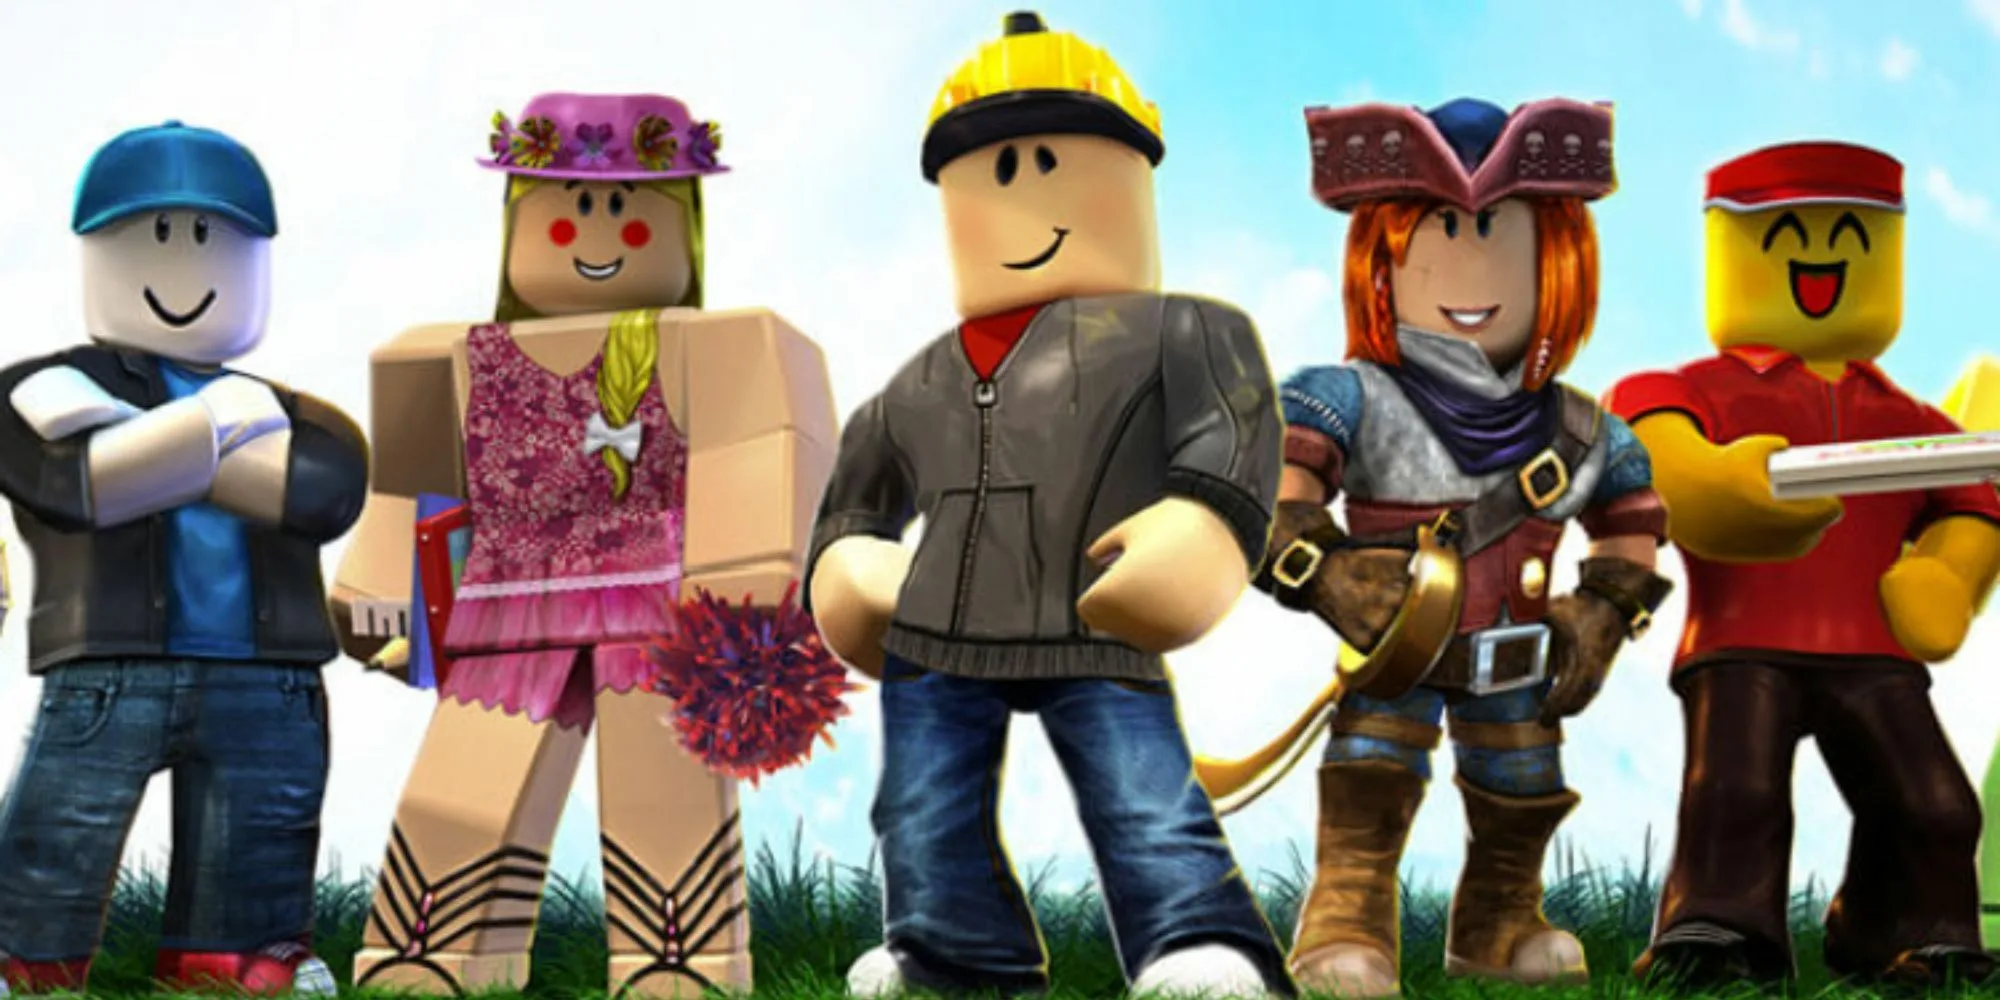 1720106431 245 Group Of Roblox Characters Standing Next To Each Other